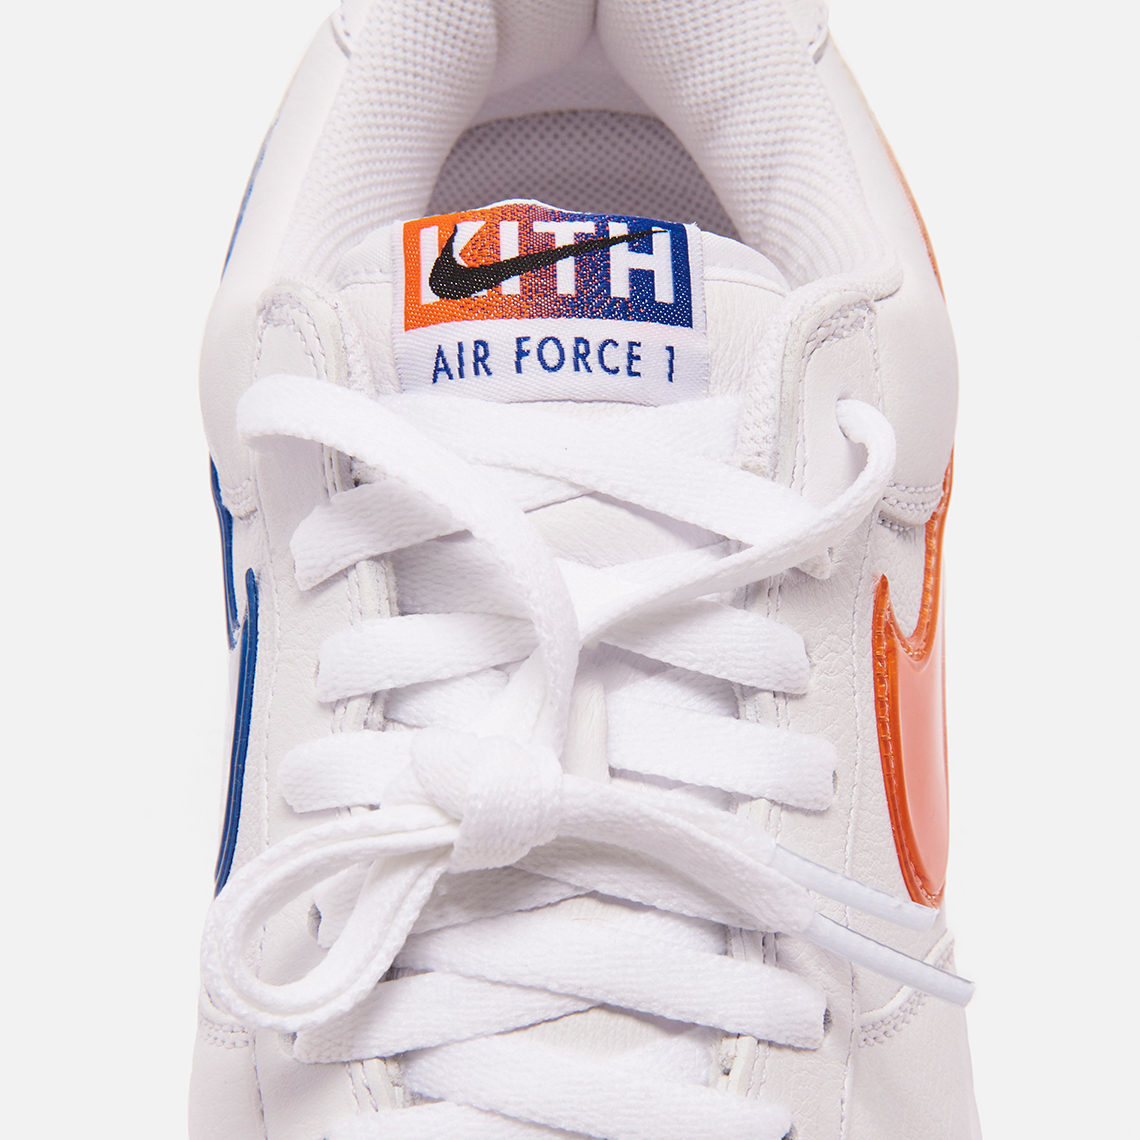 kith nike air force 1 low new york cz7928 100 release date Low